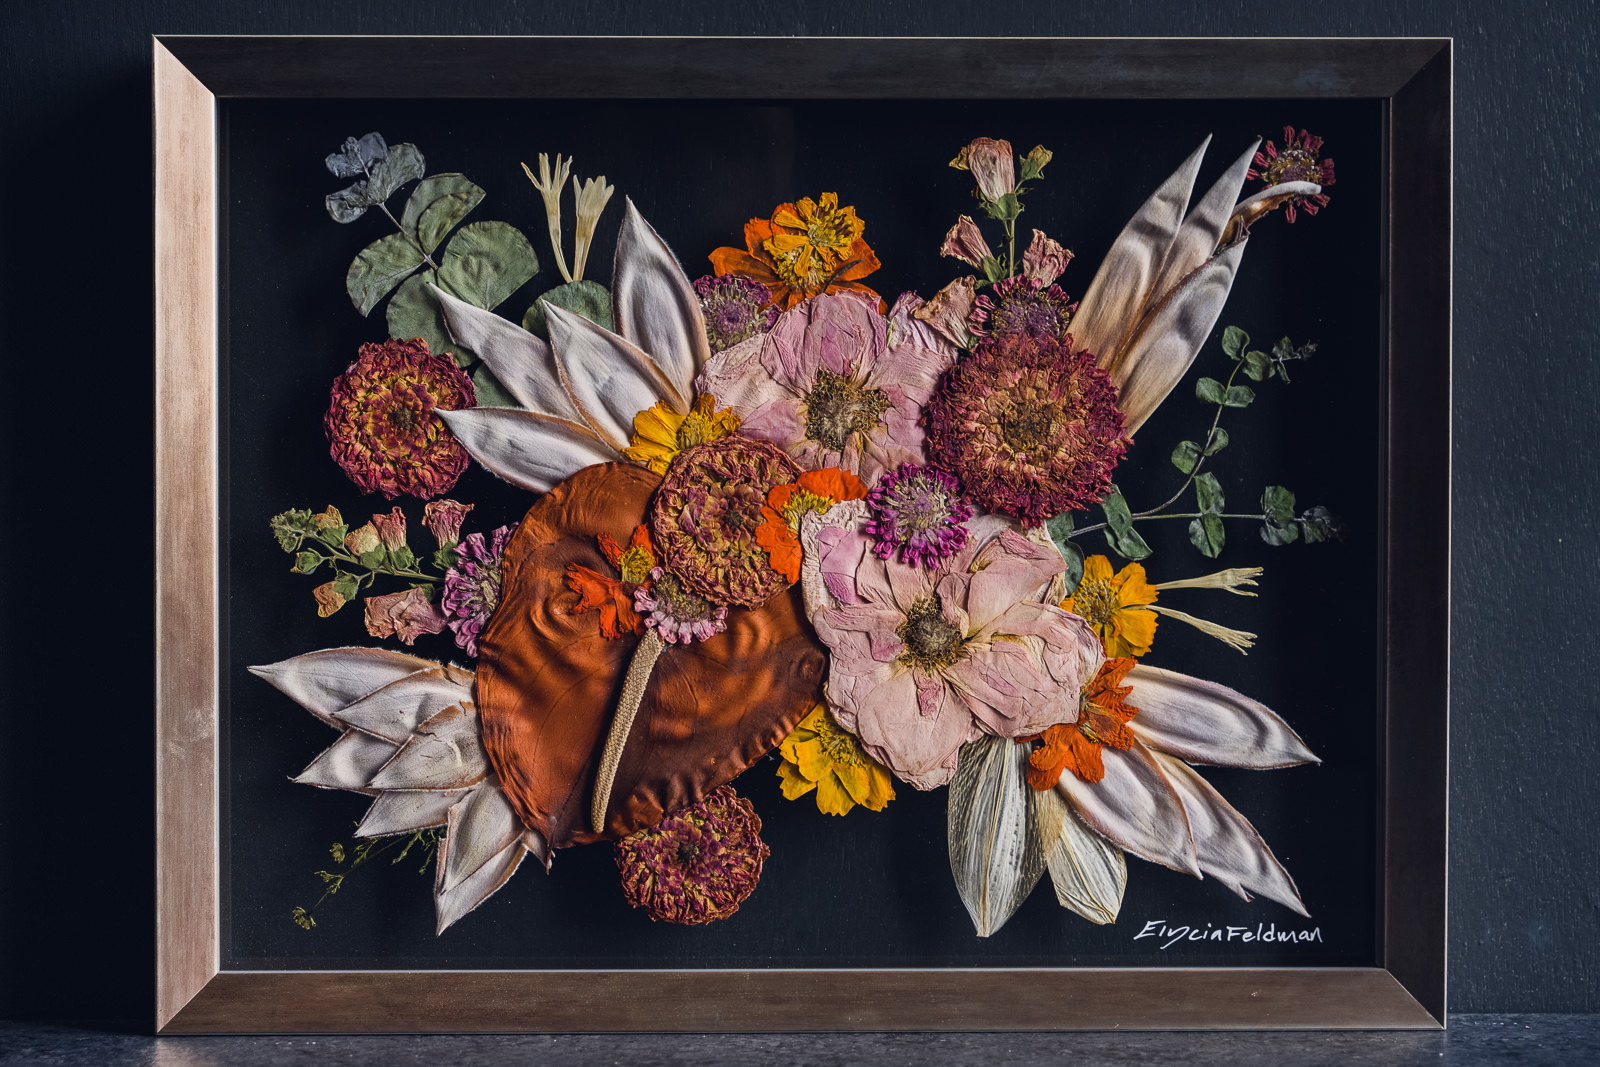 pressed flower preservation art made from bridal bouquet featuring tropical flowers and metallic frame